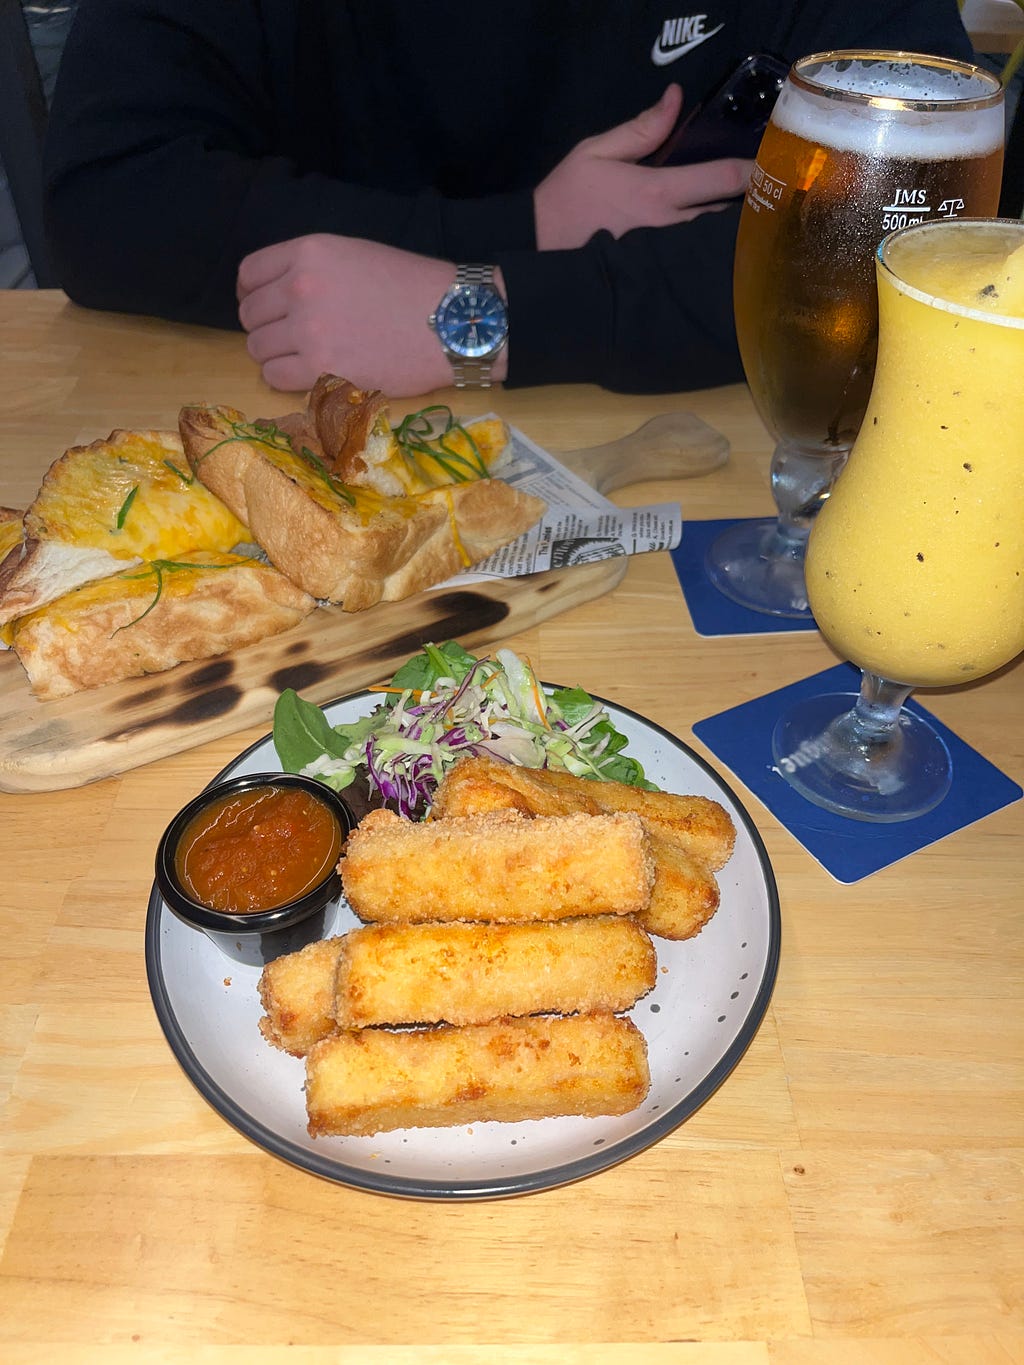 Delicious starters including garlic bread and grilled halloumi sticks at Mika’s Mexican restaurant, offering mouthwatering appetizers with fresh ingredients and bold flavors in Airlie Beach, Queensland, Australia